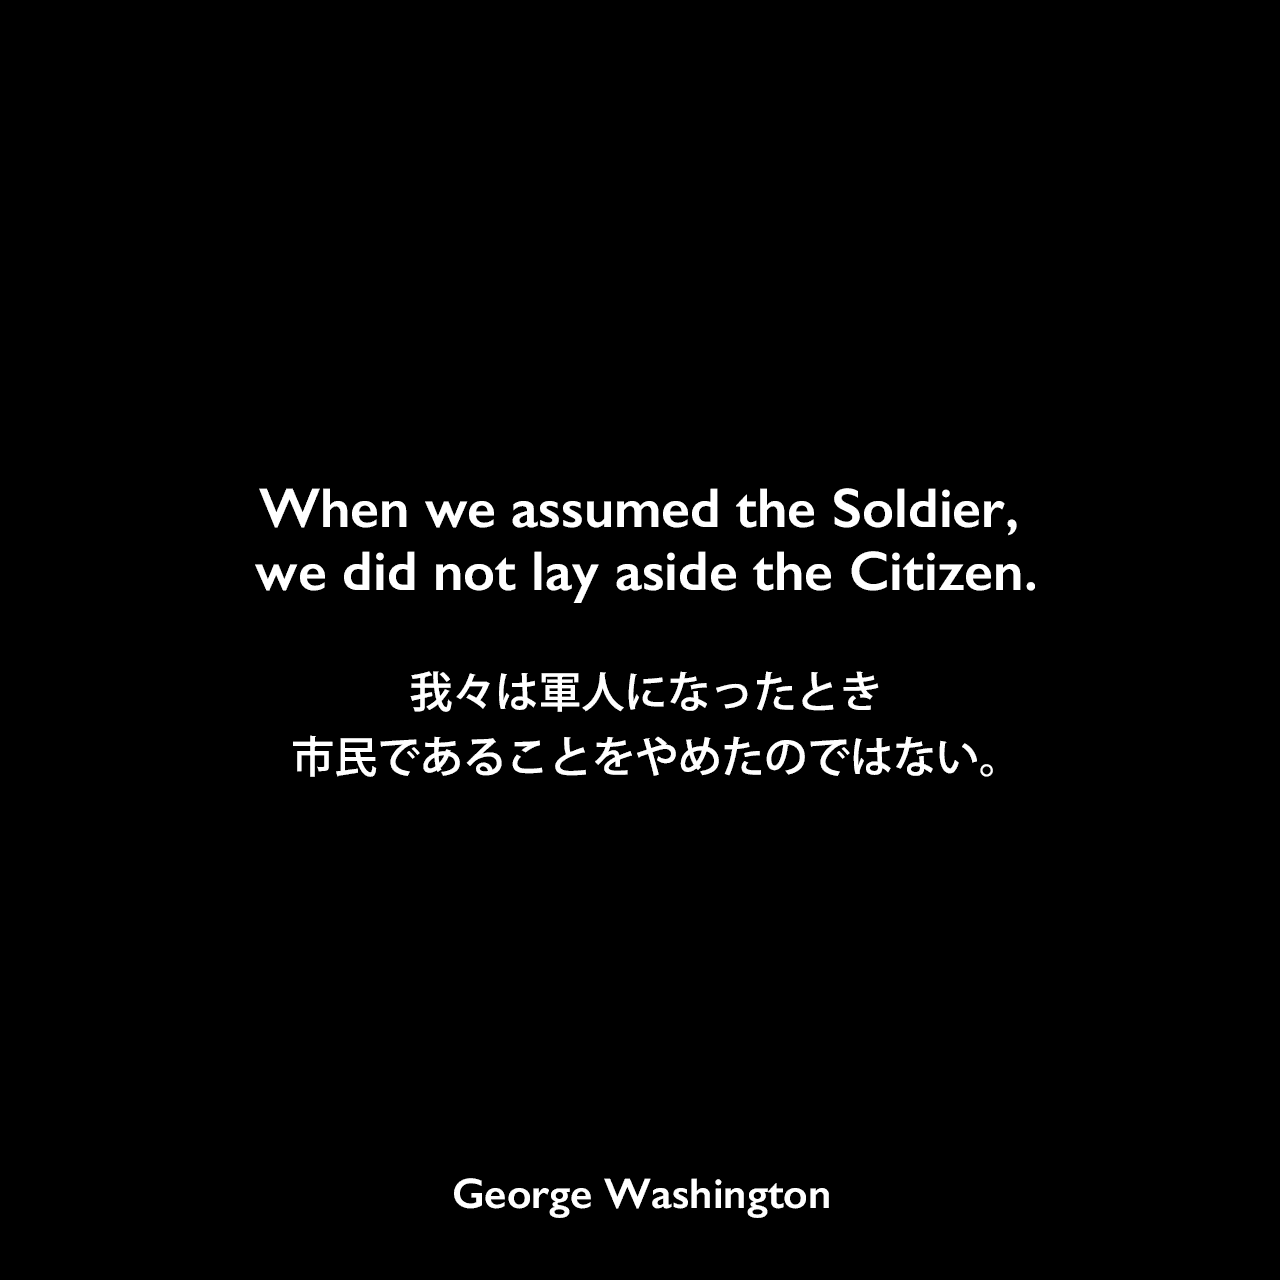 When we assumed the Soldier, we did not lay aside the Citizen.我々は軍人になったとき、市民であることをやめたのではない。George Washington